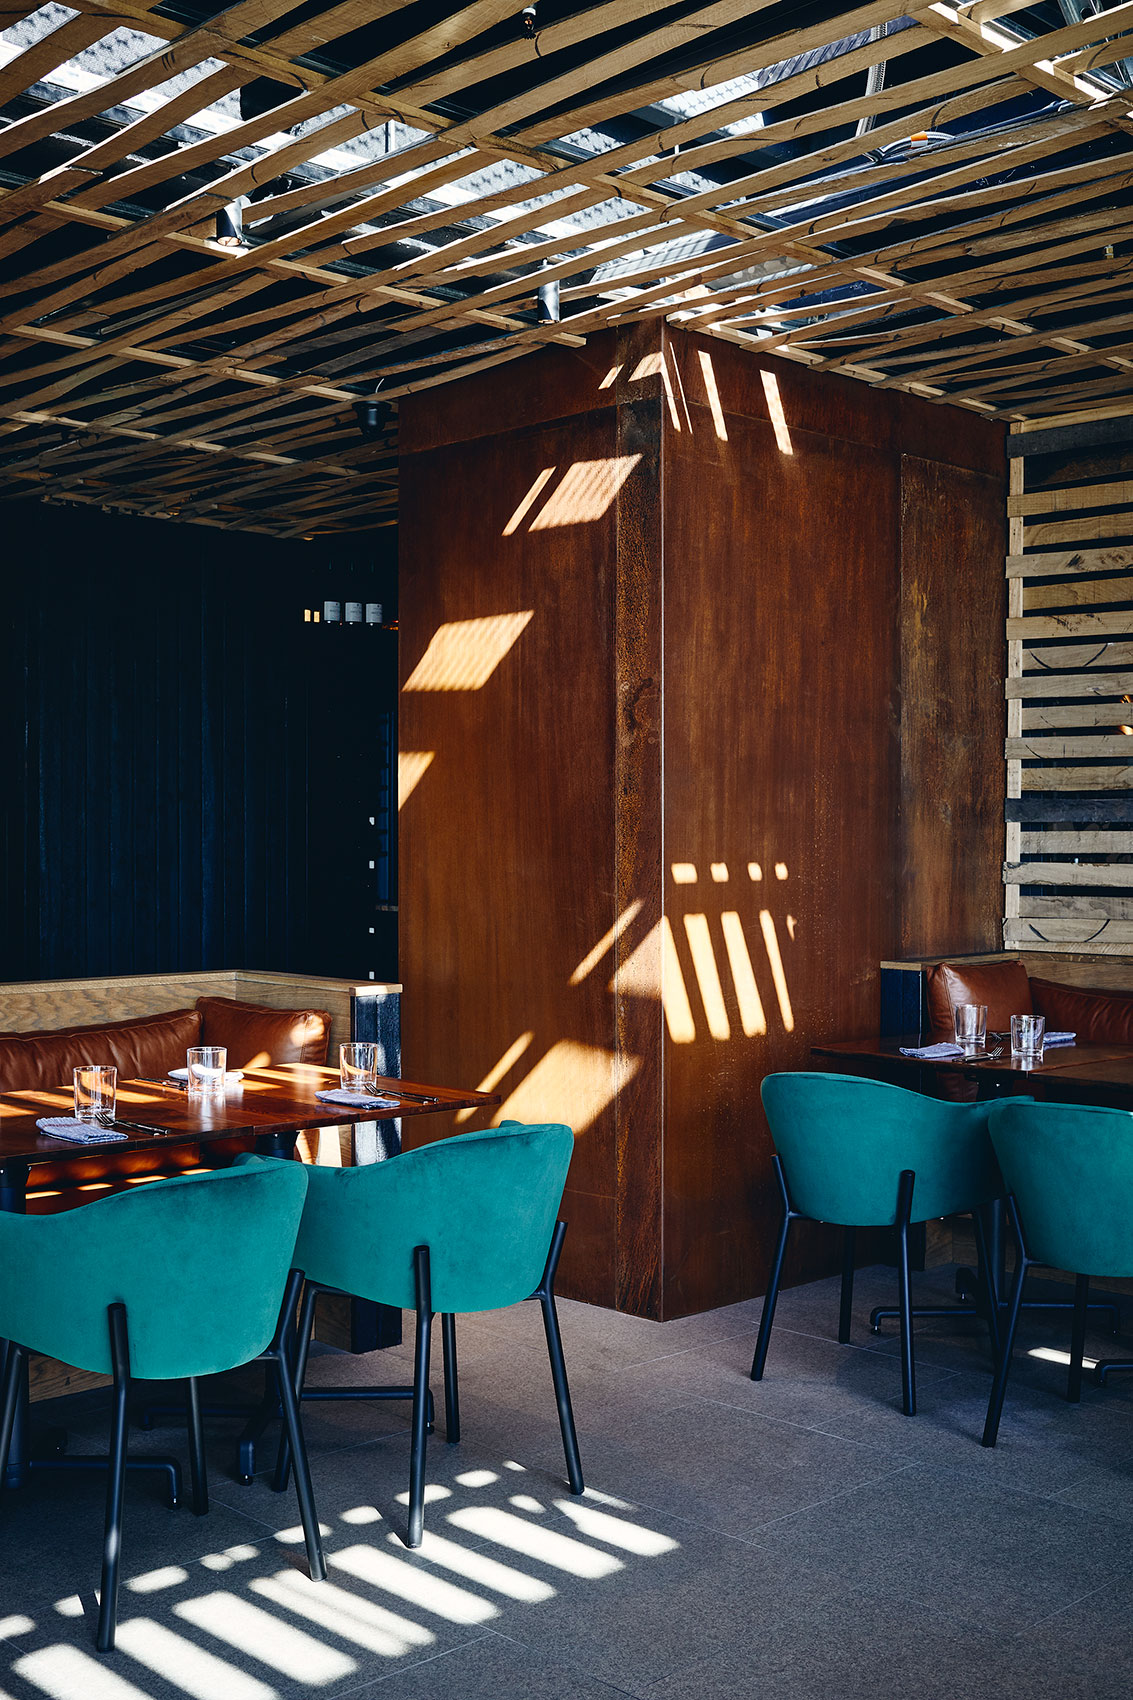 Ahi Interior Woven Oak Ceiling Filtering Light • Hospitality & Culinary Food Photography